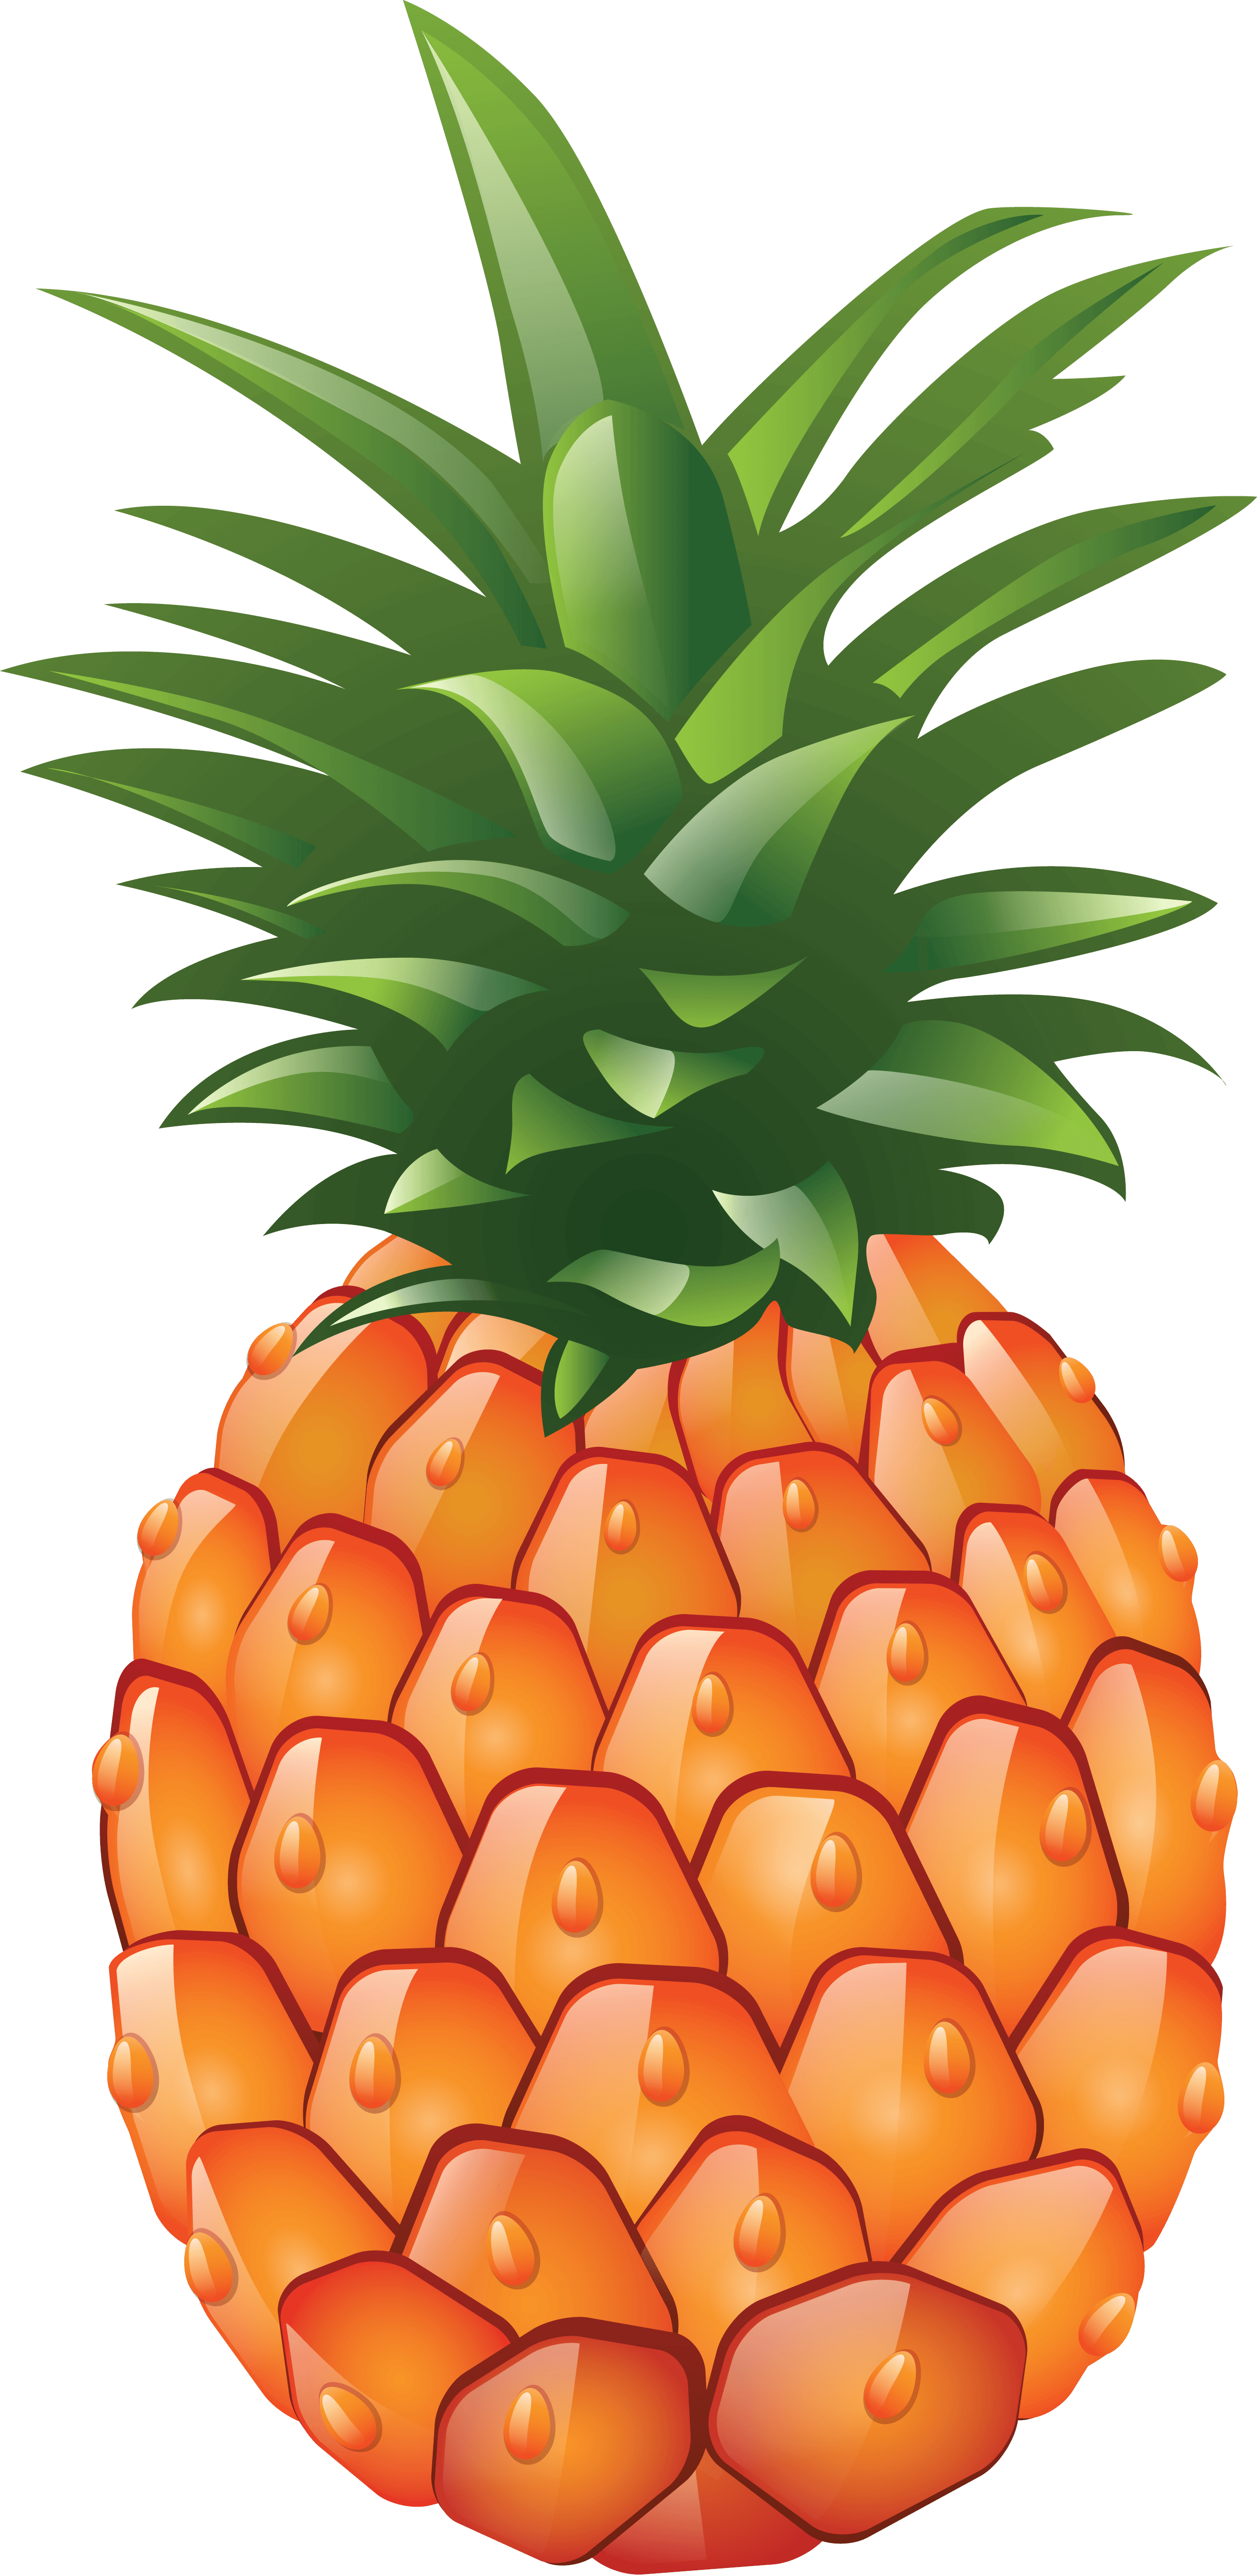 Pineapple PNG Photo Image